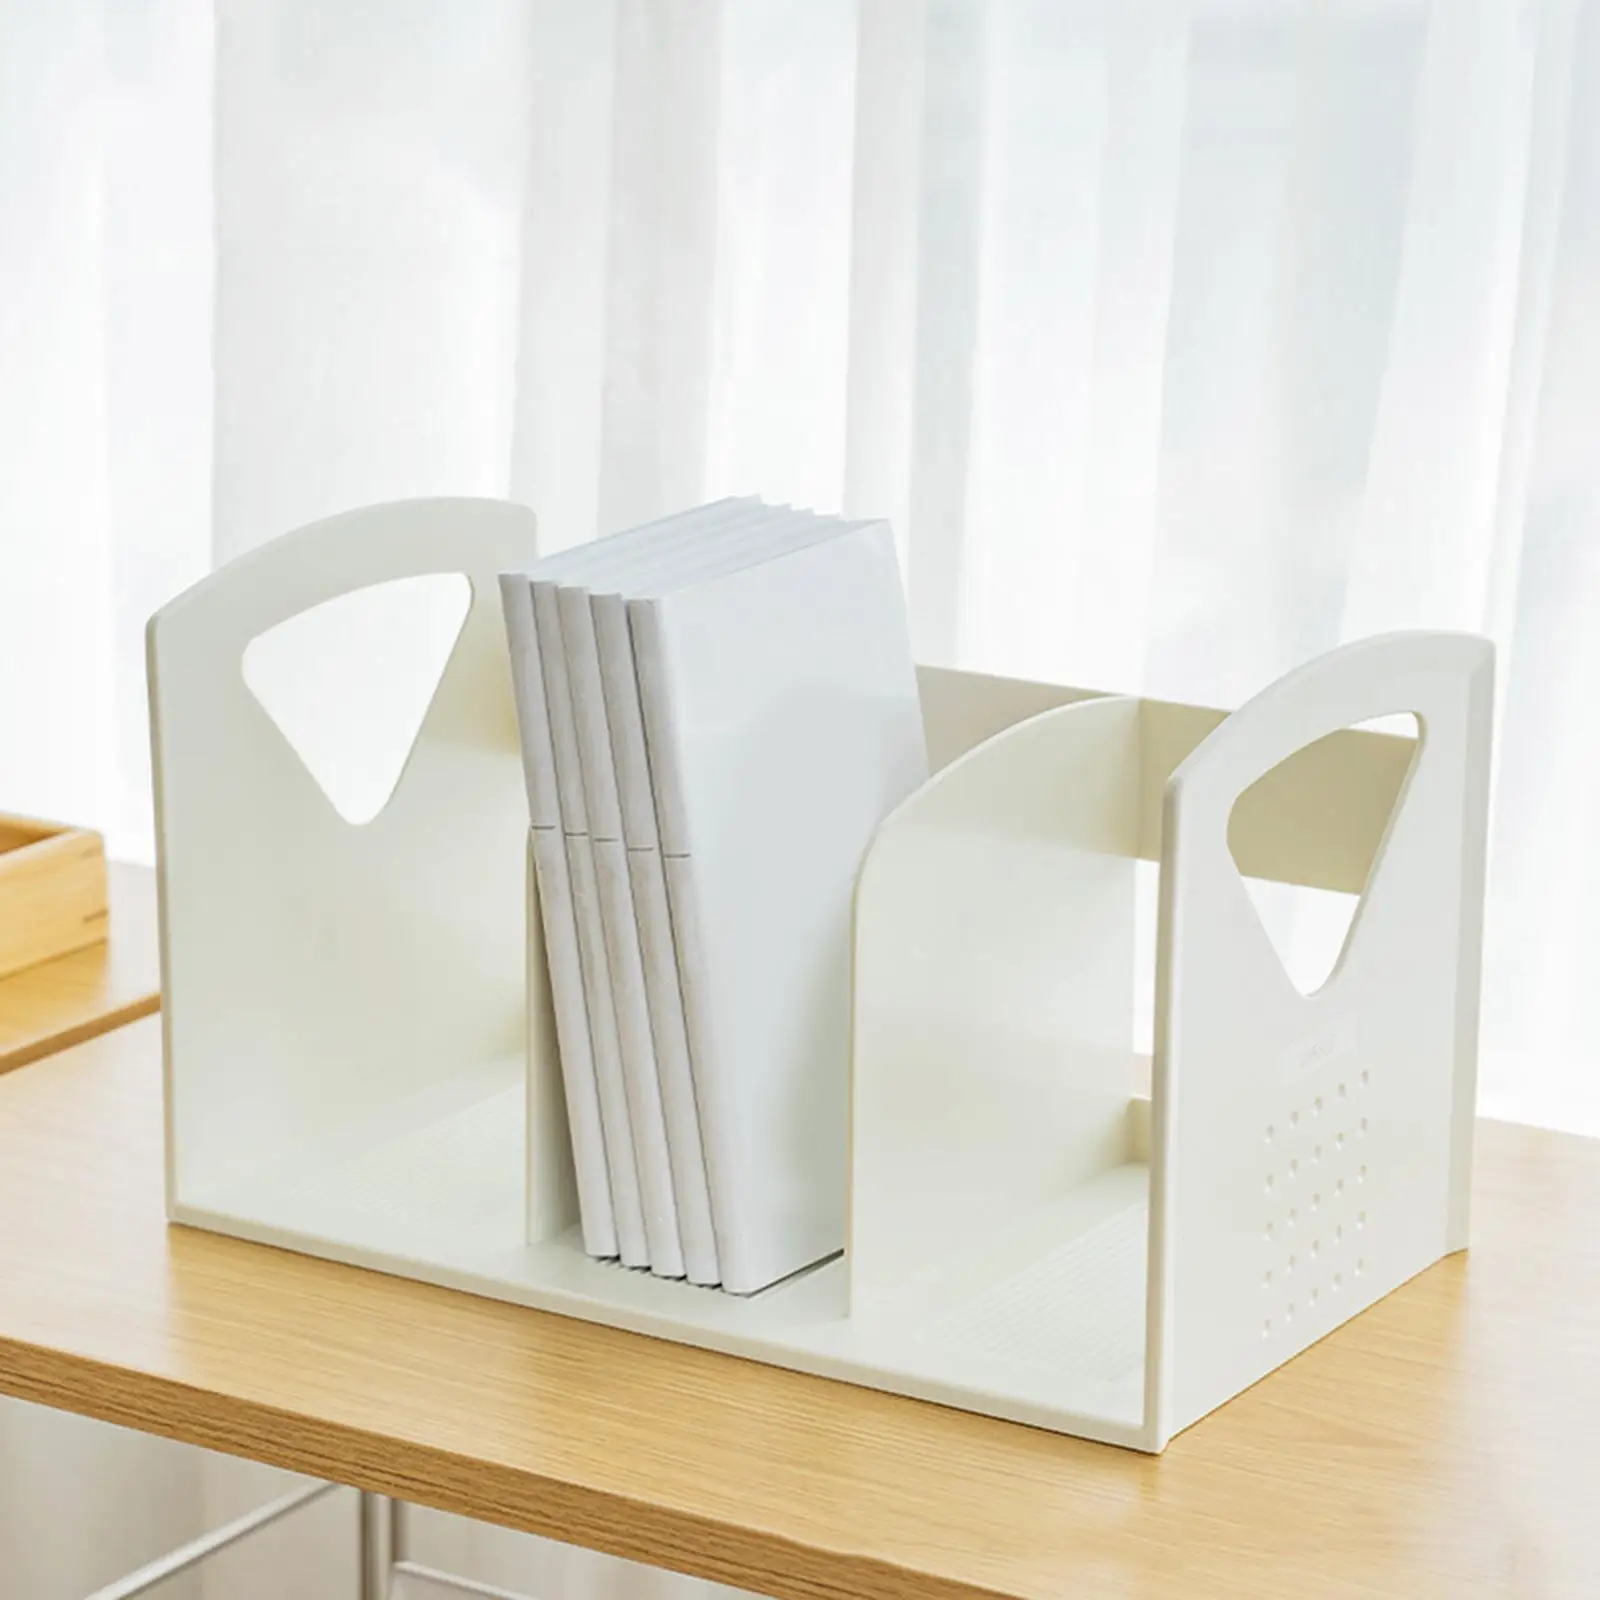 Bookends For Shelves Book Support Stand Bookshelf With 3 Compartments Holder Desk Organizer Office Accessories